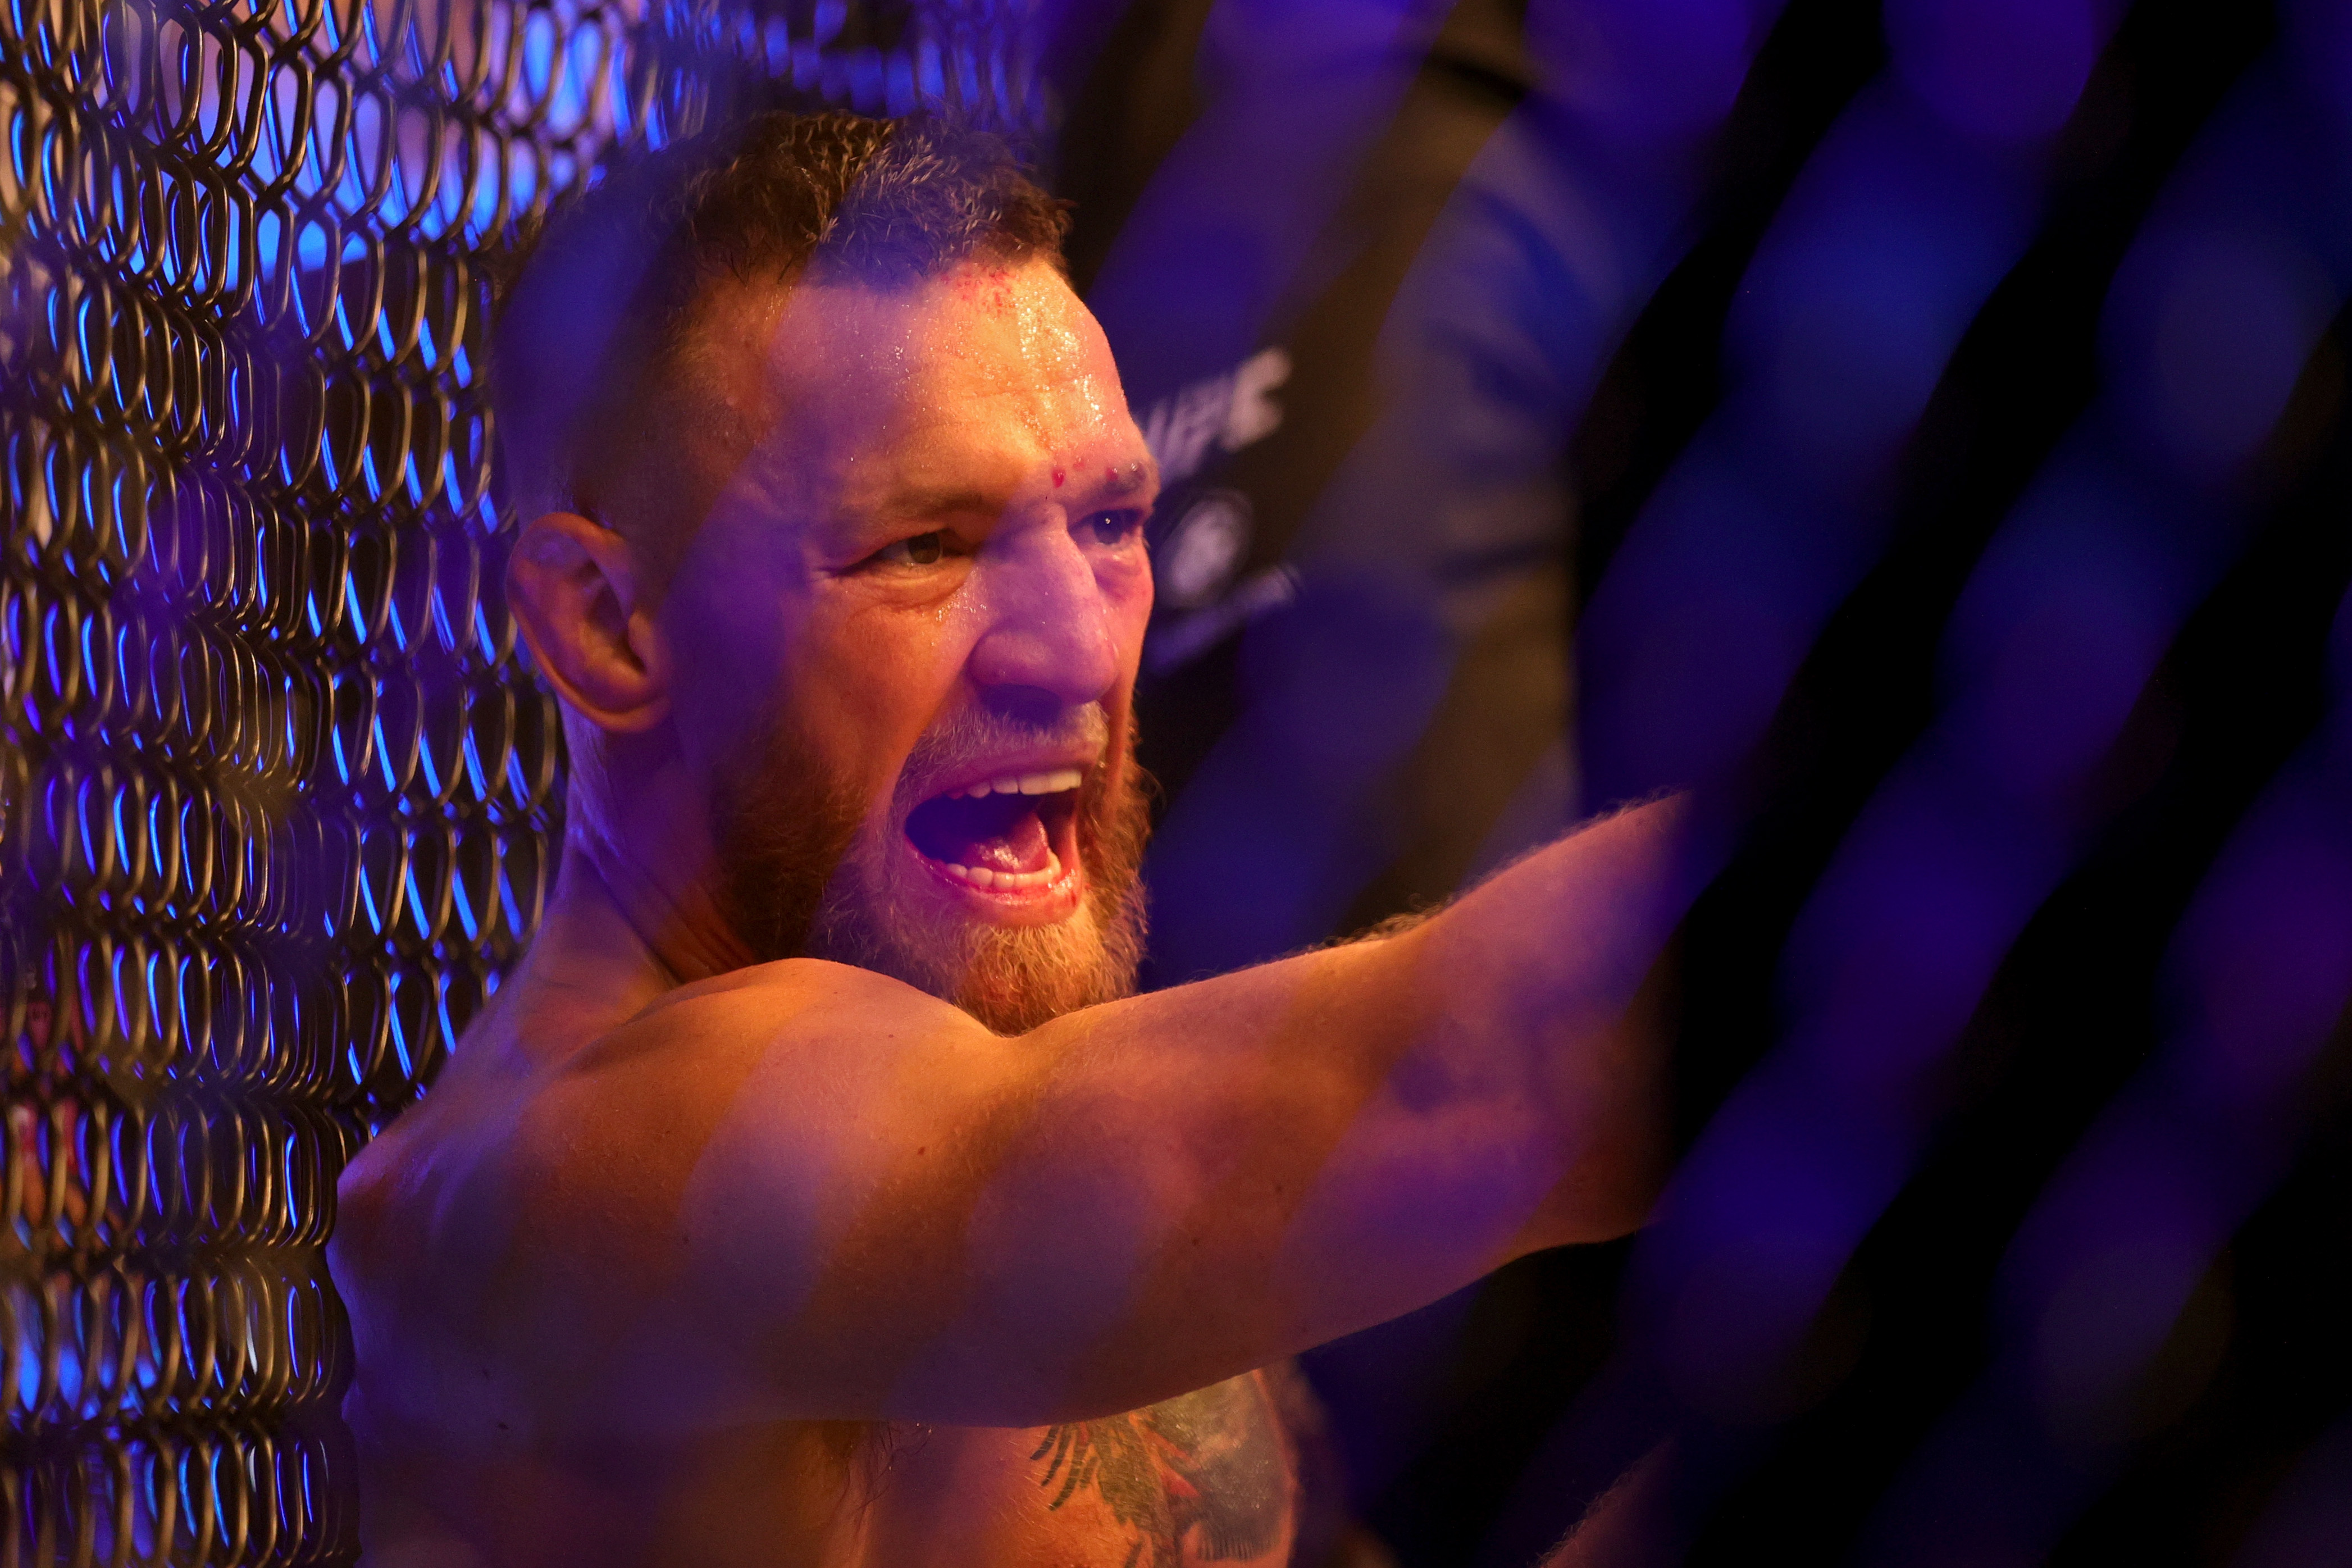 Conor McGregor rants at Dustin Poirier following his loss at UFC 264.